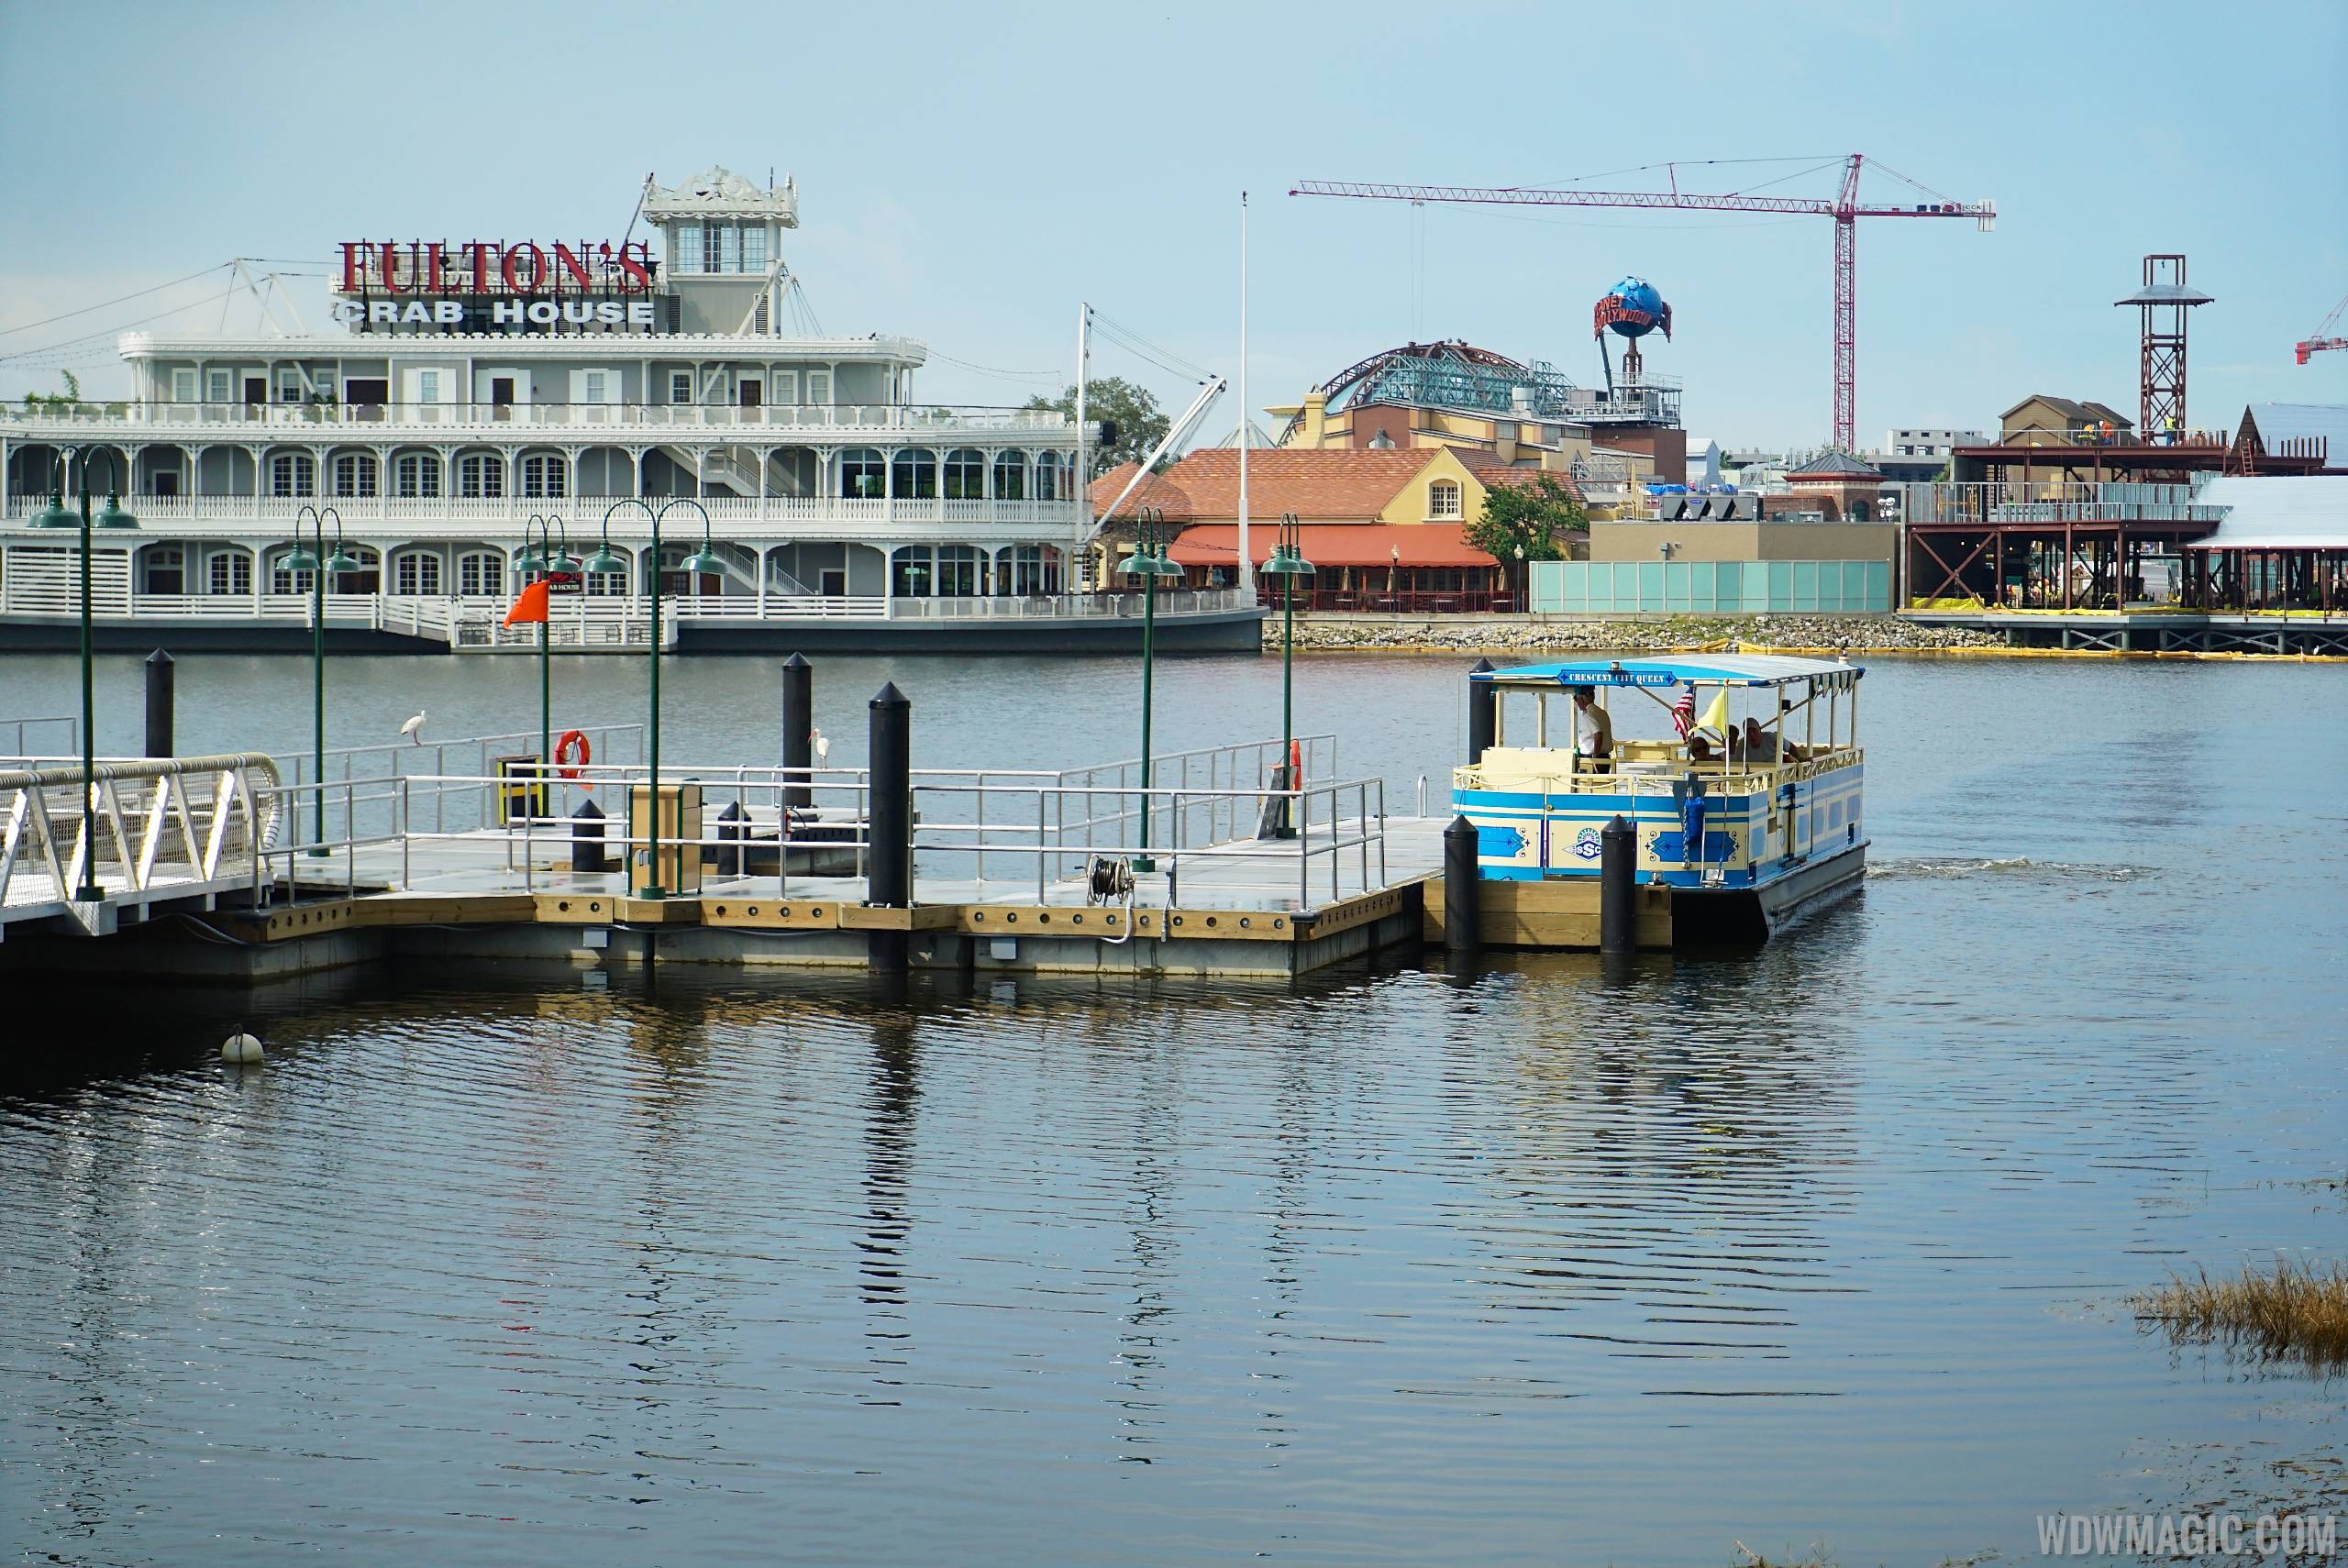 PHOTOS - Disney Springs Marketplace boat dock and walkway to Saratoga Springs opens